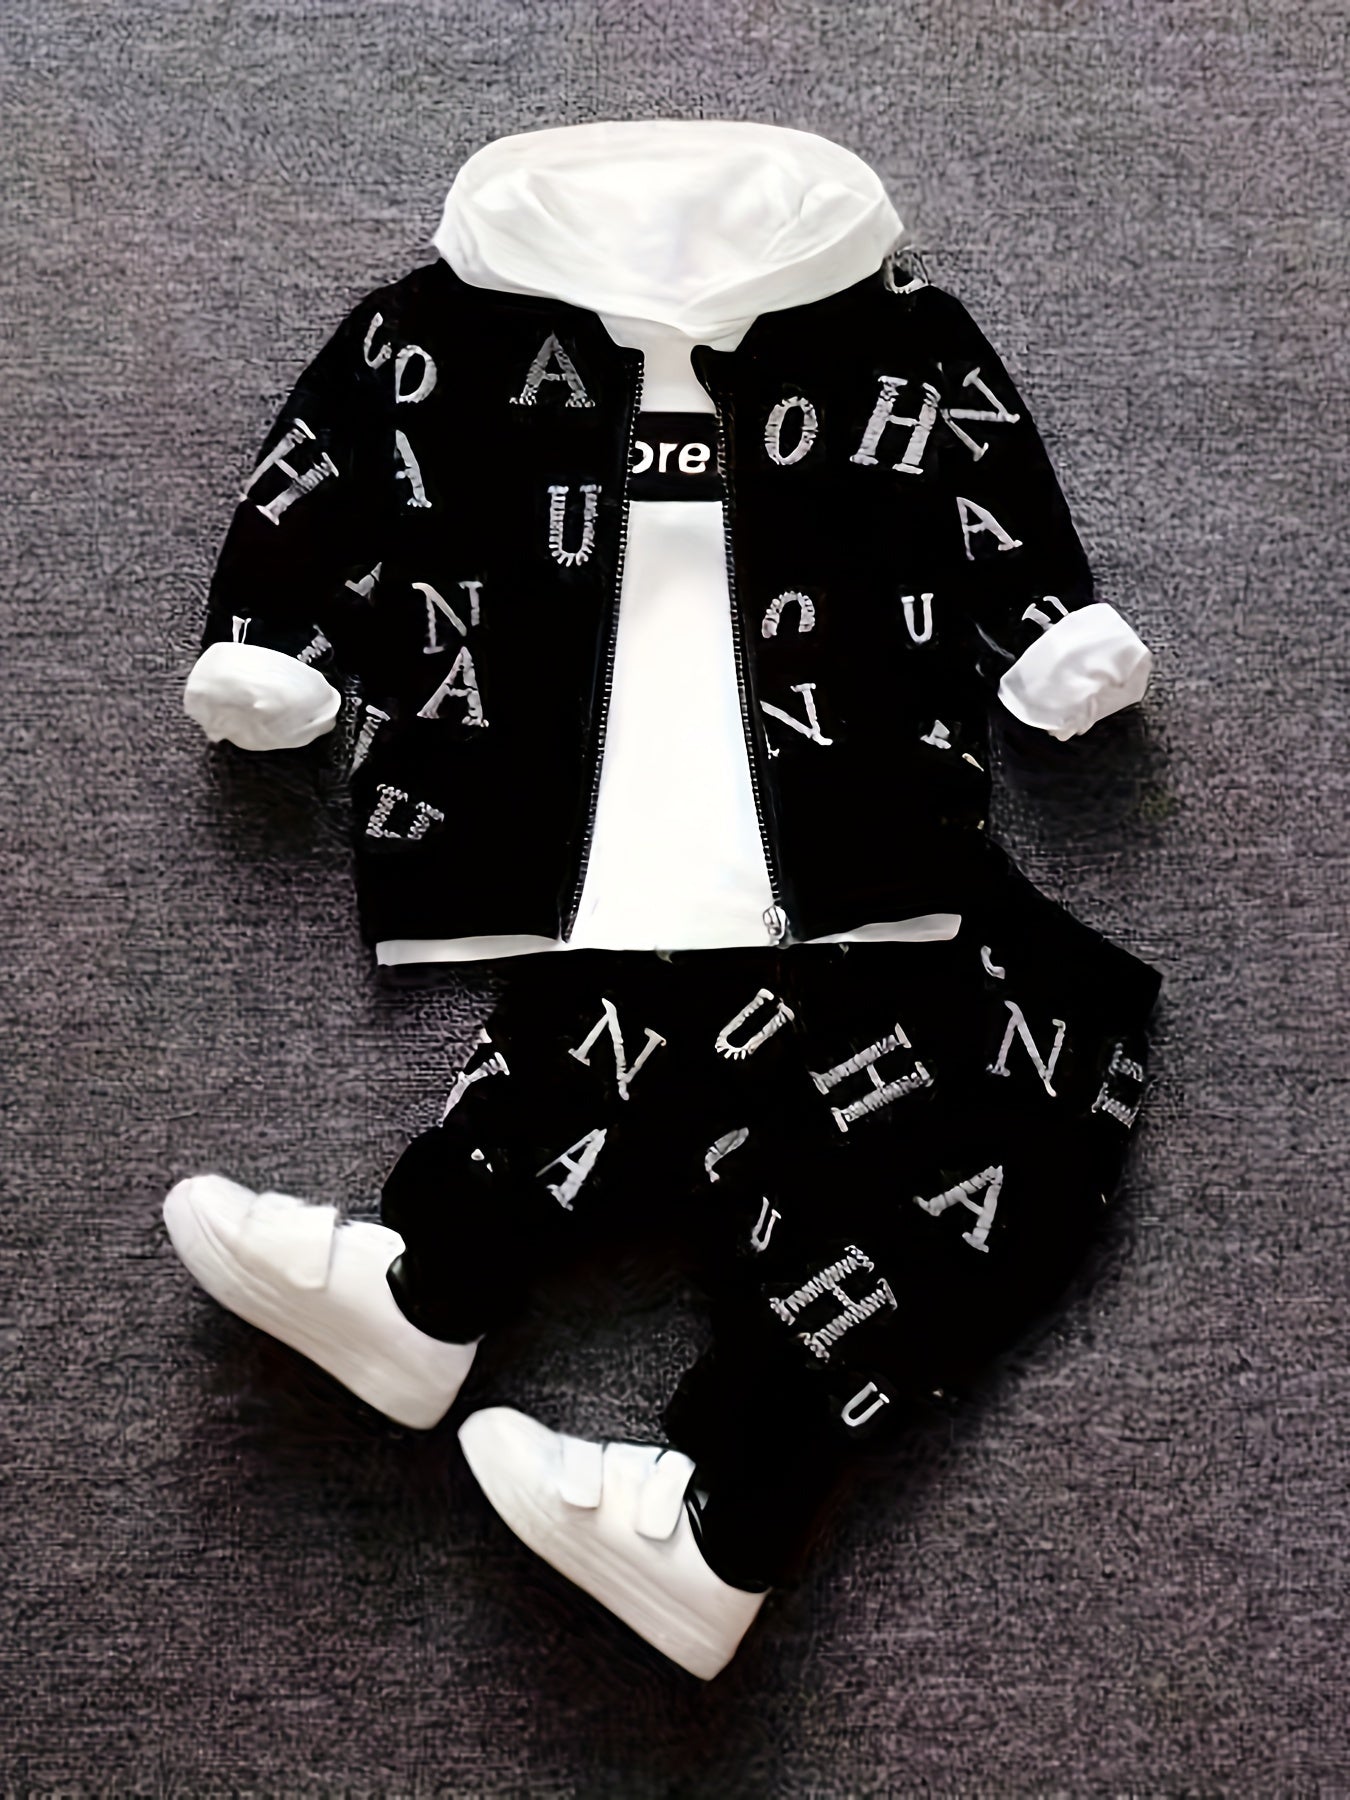 Boys Spring And Autumn New Long-sleeved Suit Baby Boy Letter Print Top Coat Pants Set Children's Fashion Casual Suit